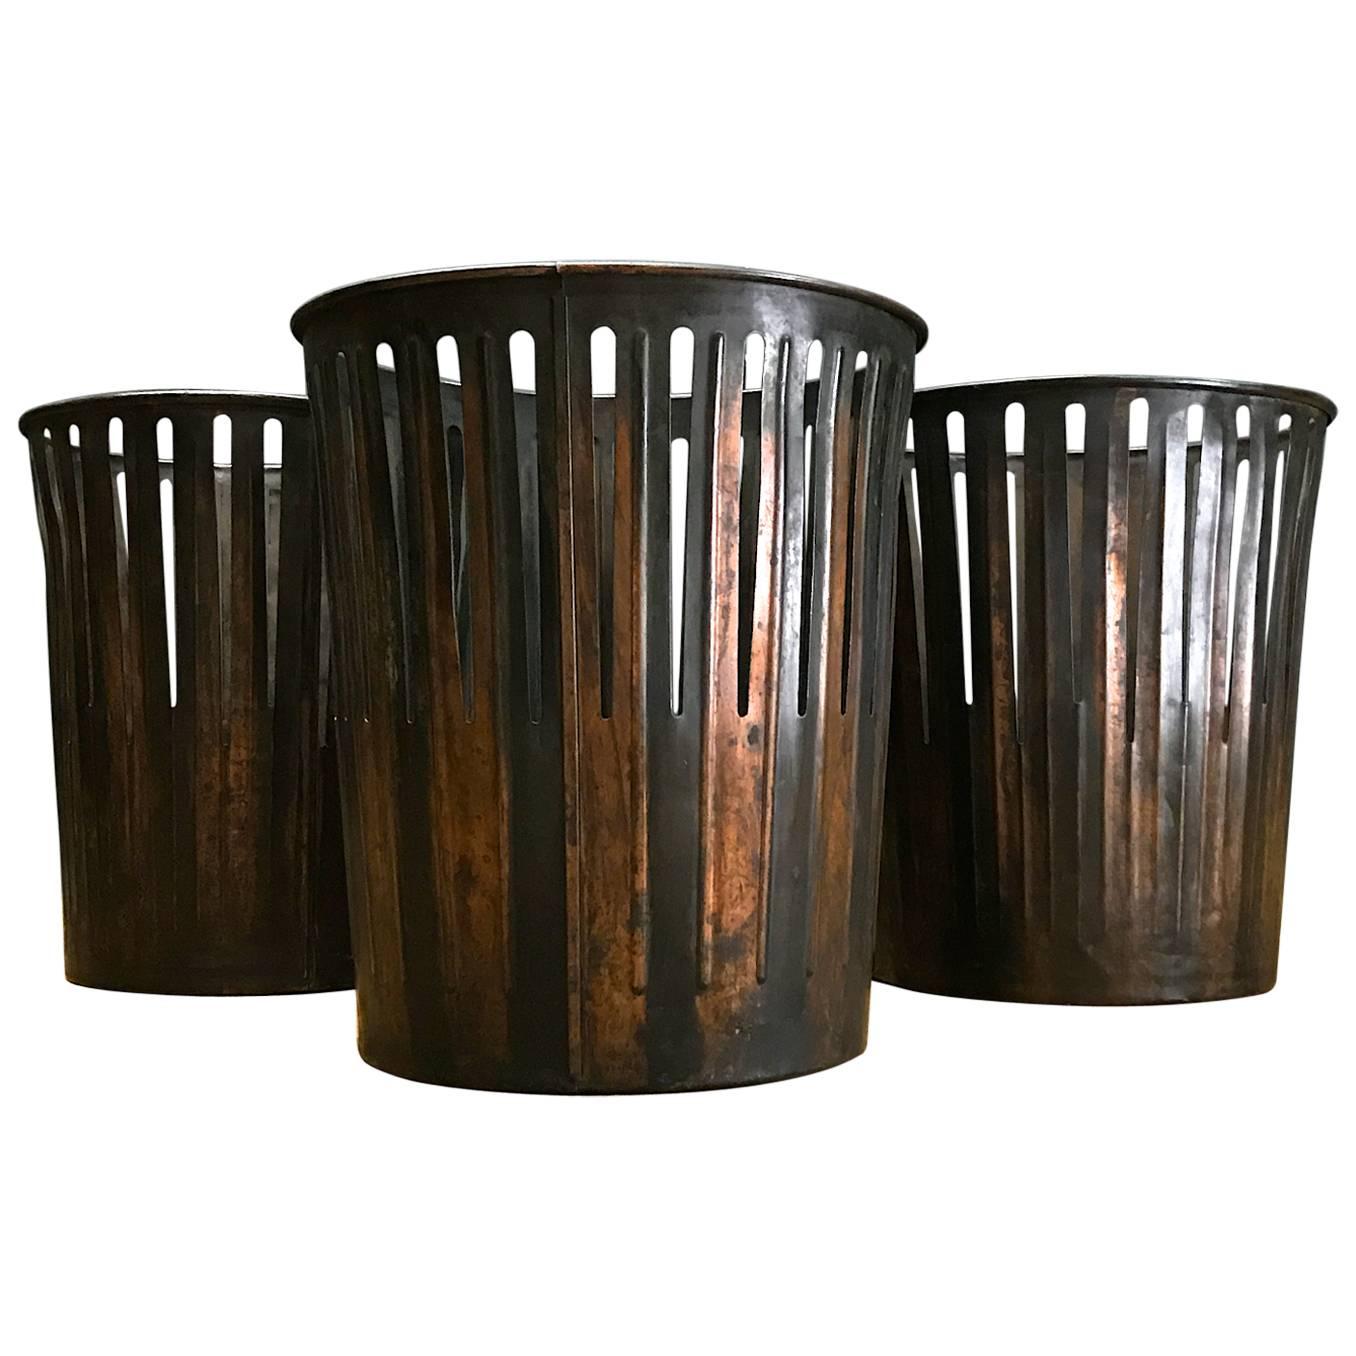 Japanned Finished Industrial Copper Office Wastebaskets Trash Cans Victorian Era